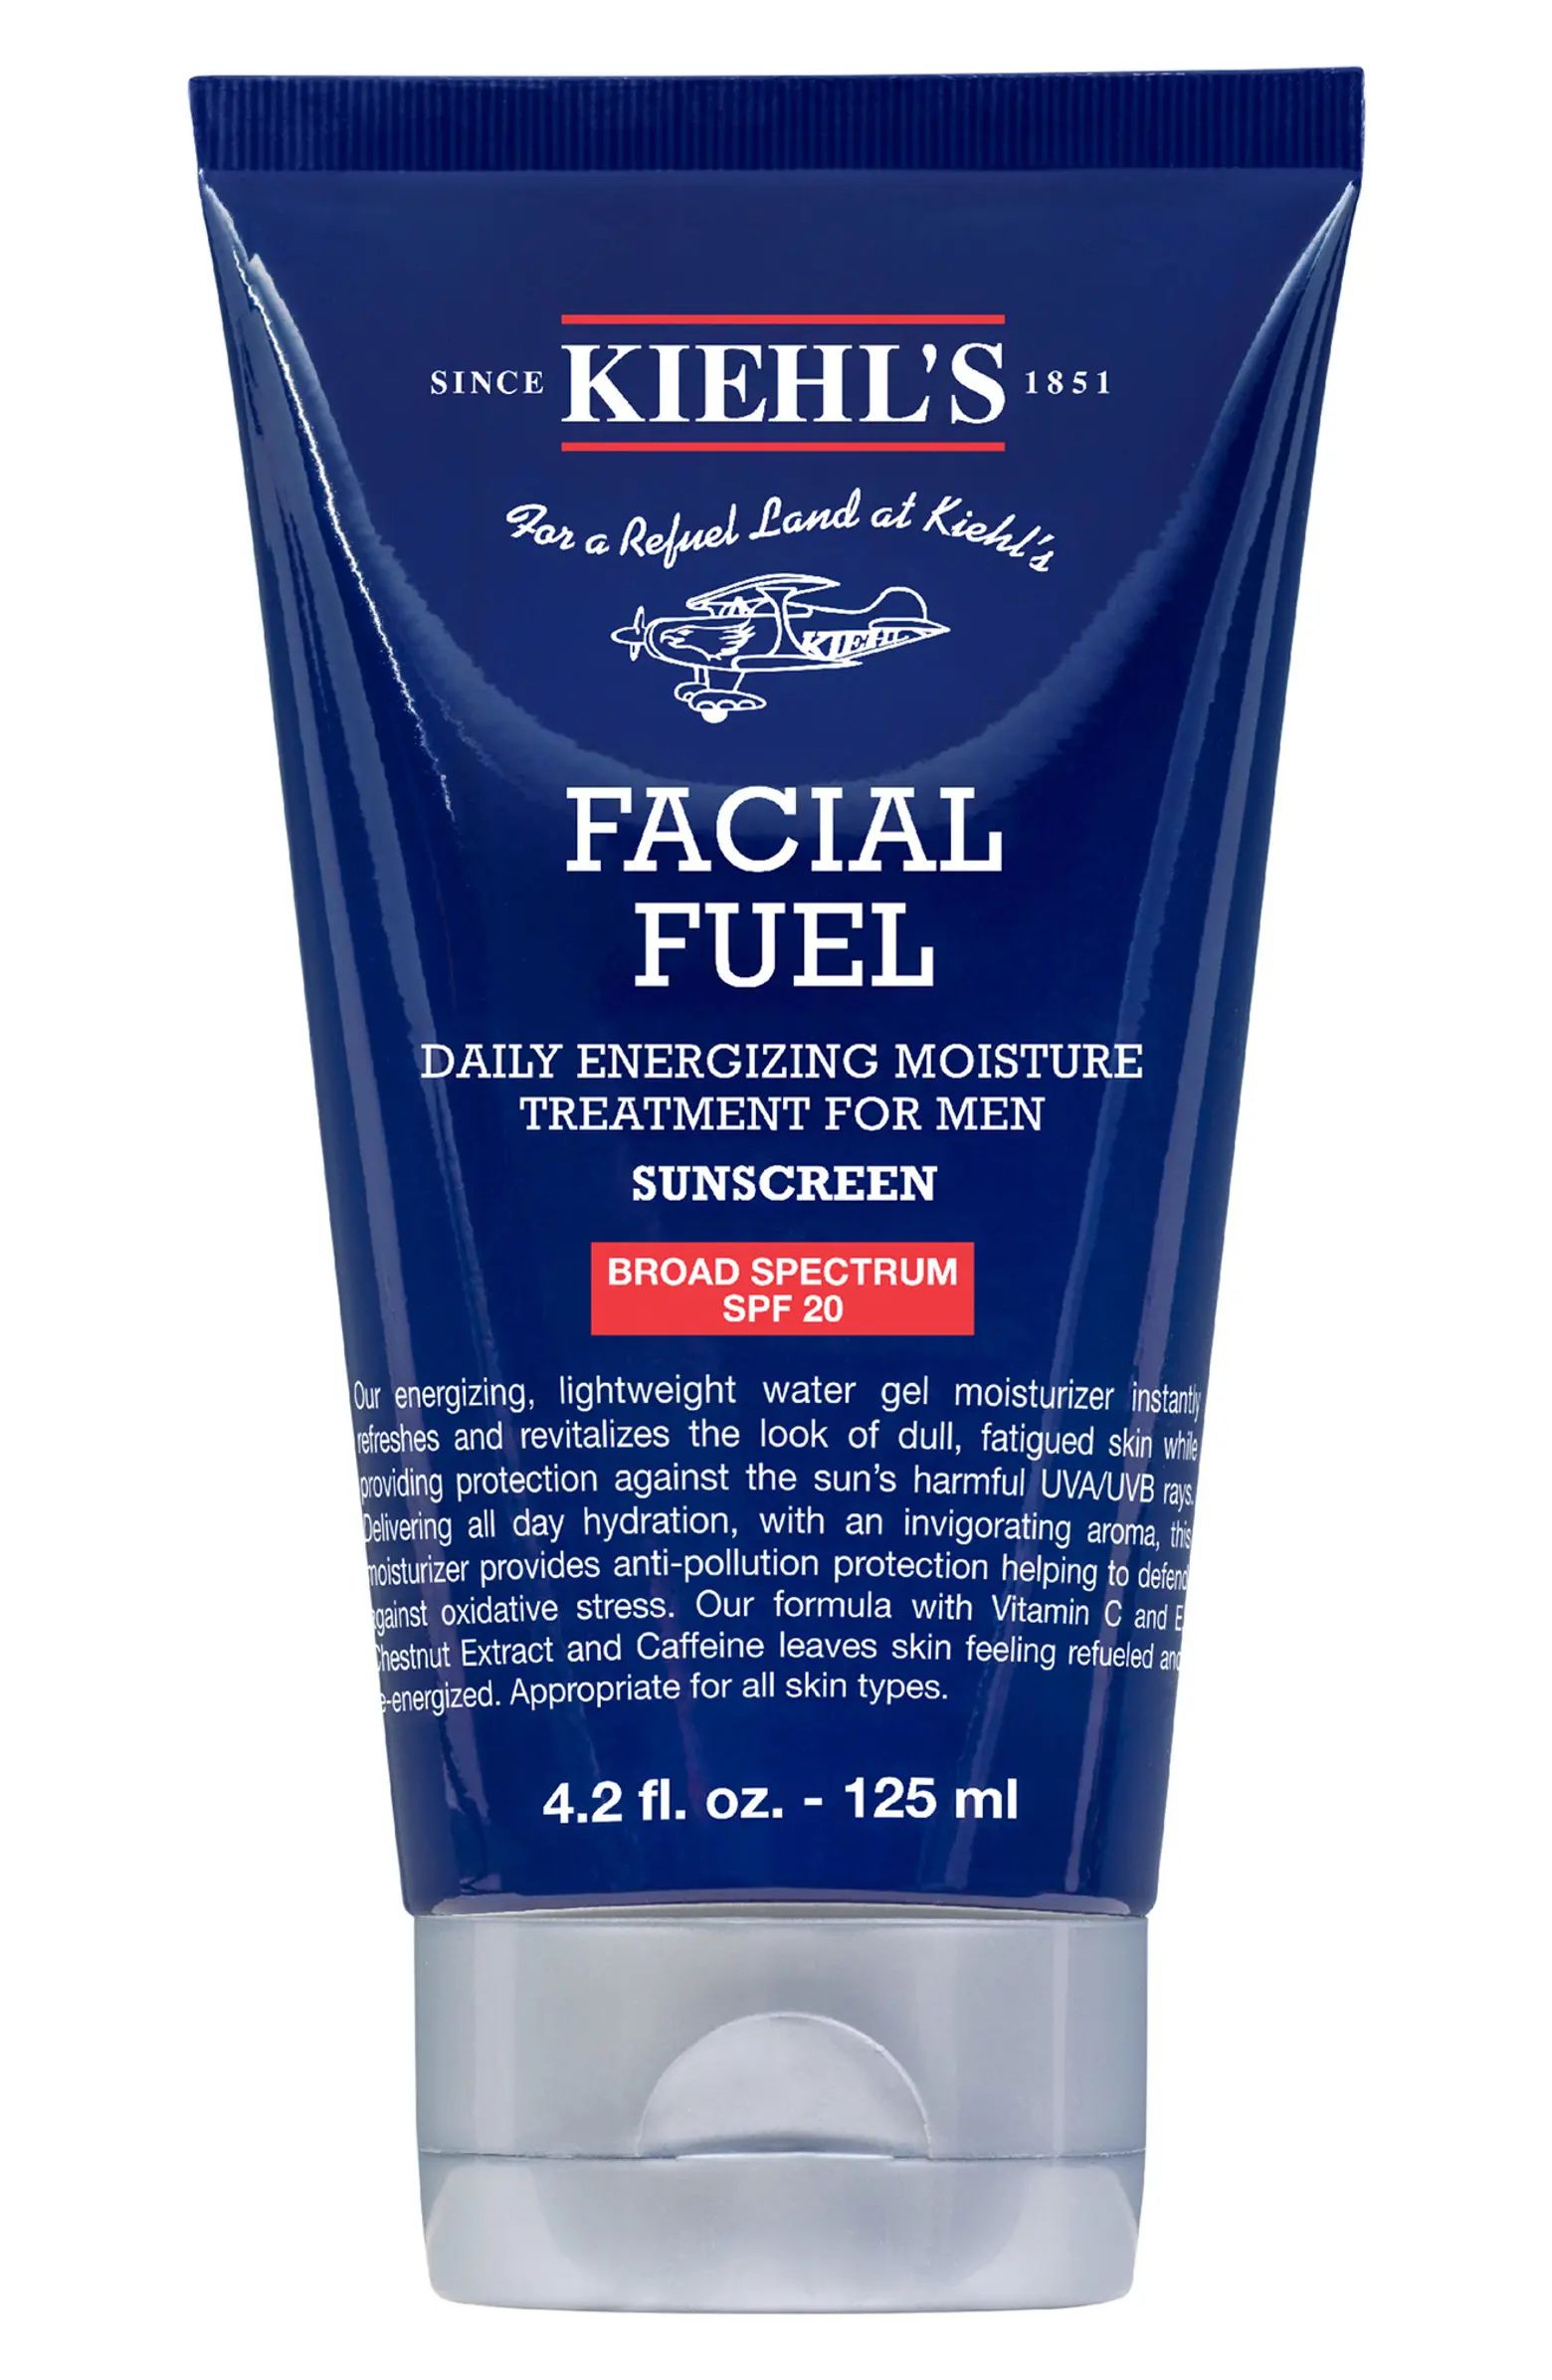 Facial Fuel Daily Energizing Moisture Treatment for Men SPF 20 | Nordstrom